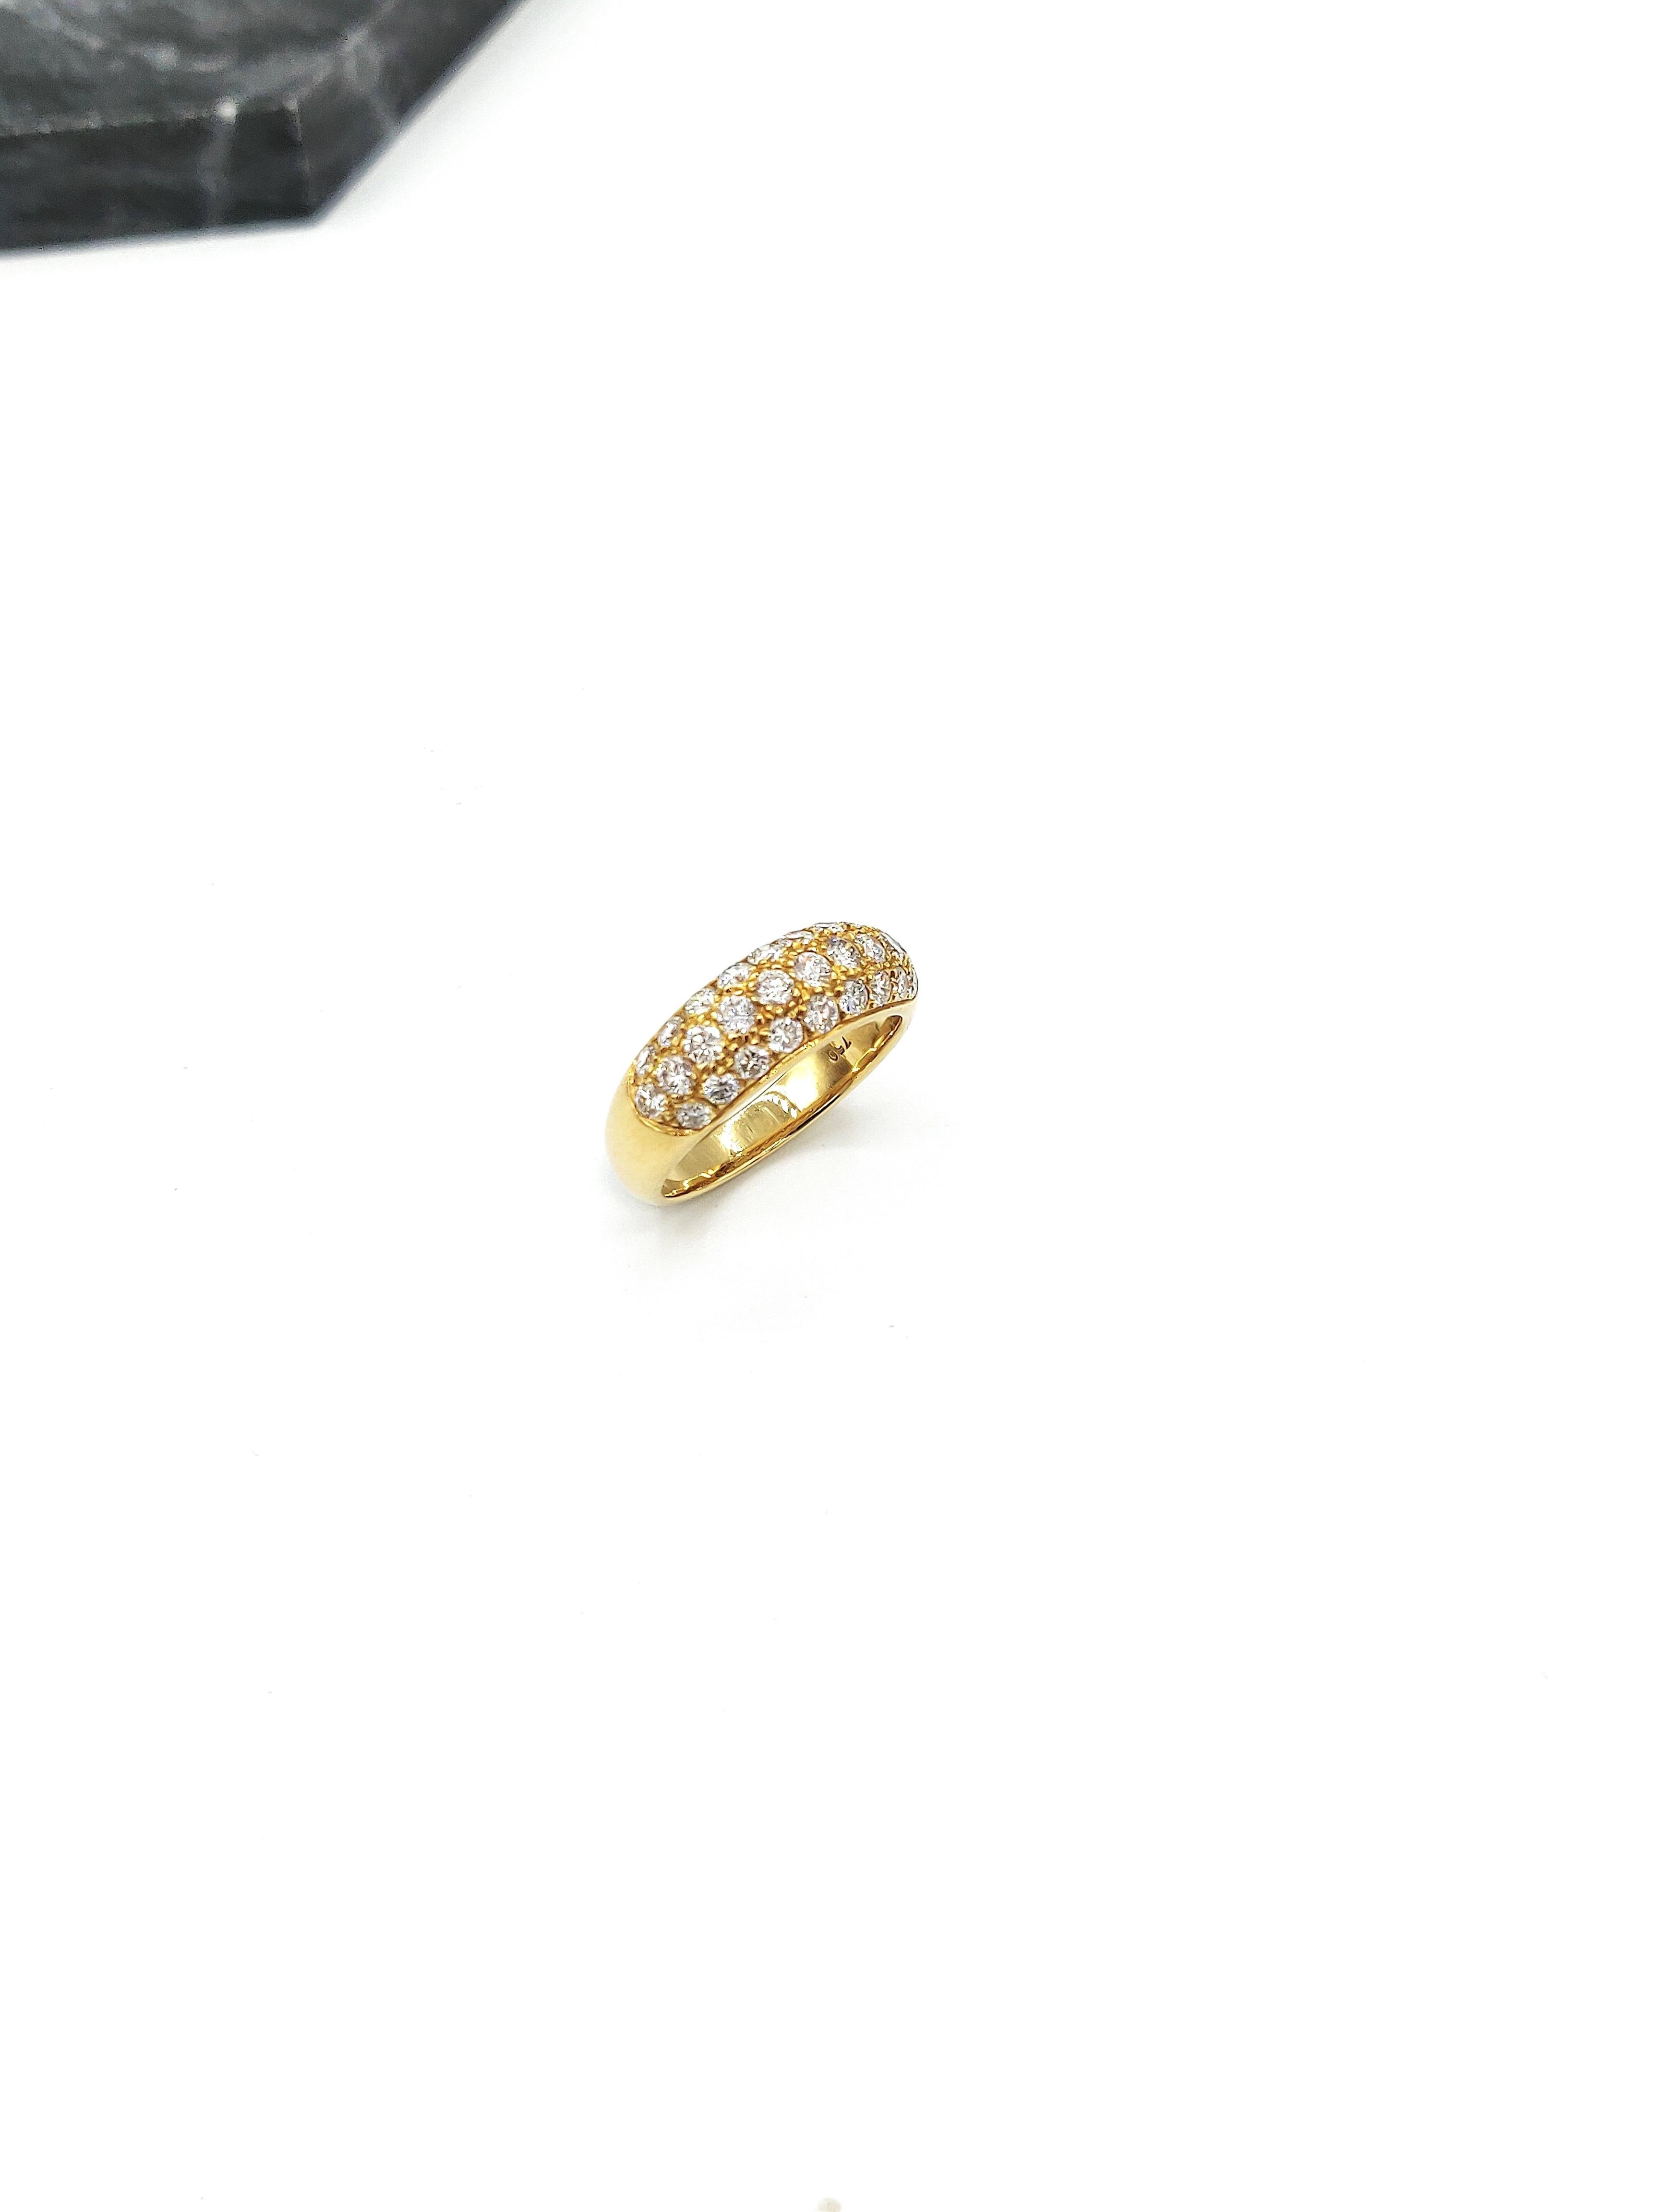 Diamond Pavé Half Round 18 Karat Yellow Gold Band Ring

Please let us know upon checkout should you wish to have the ring resized. 
Ring size: 49

Gold: 18K 4.478g.
Diamond: 0.97ct.